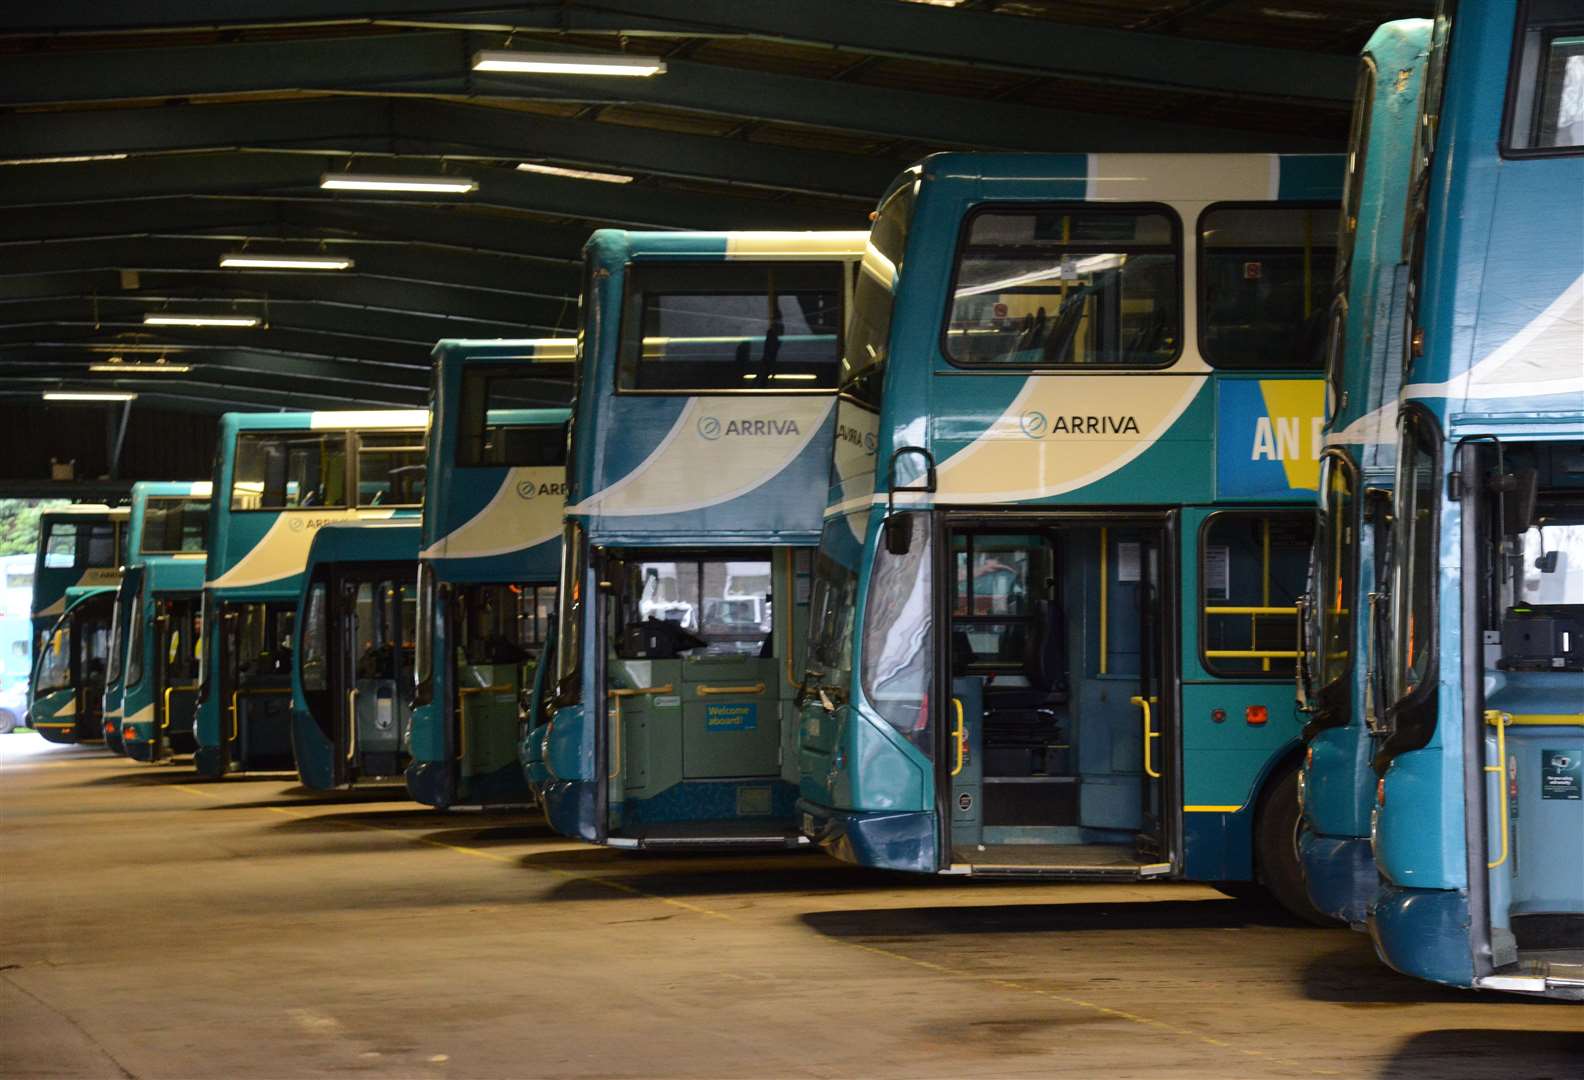 Arriva is curtailing its services